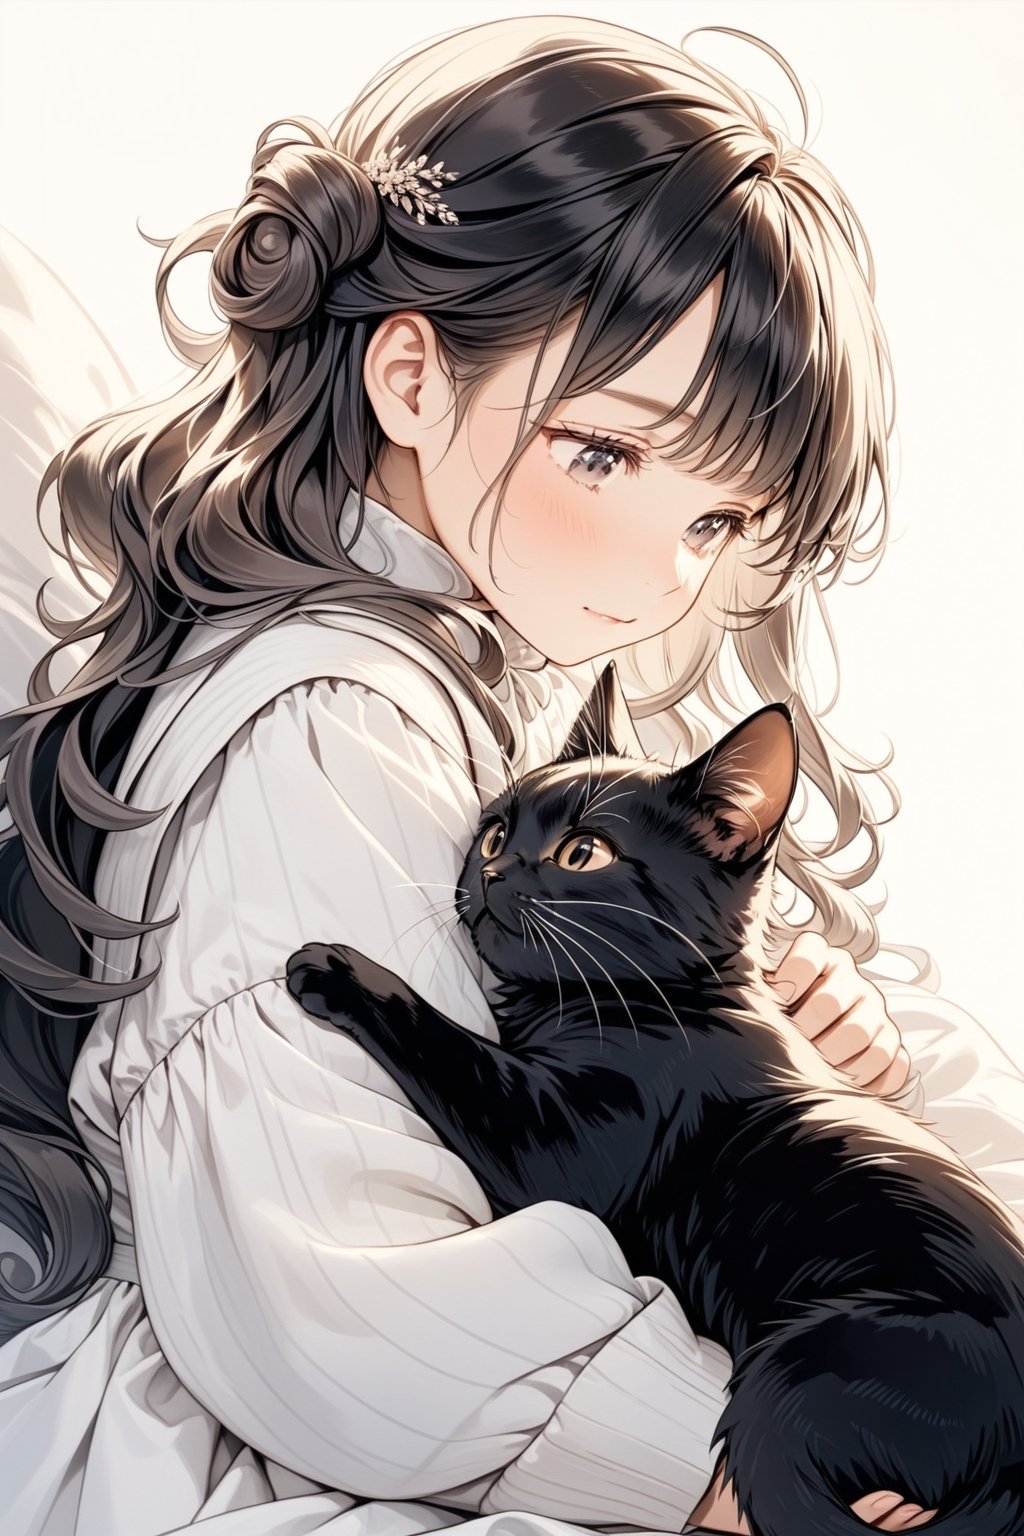 a girl gently touches the curled-up cat